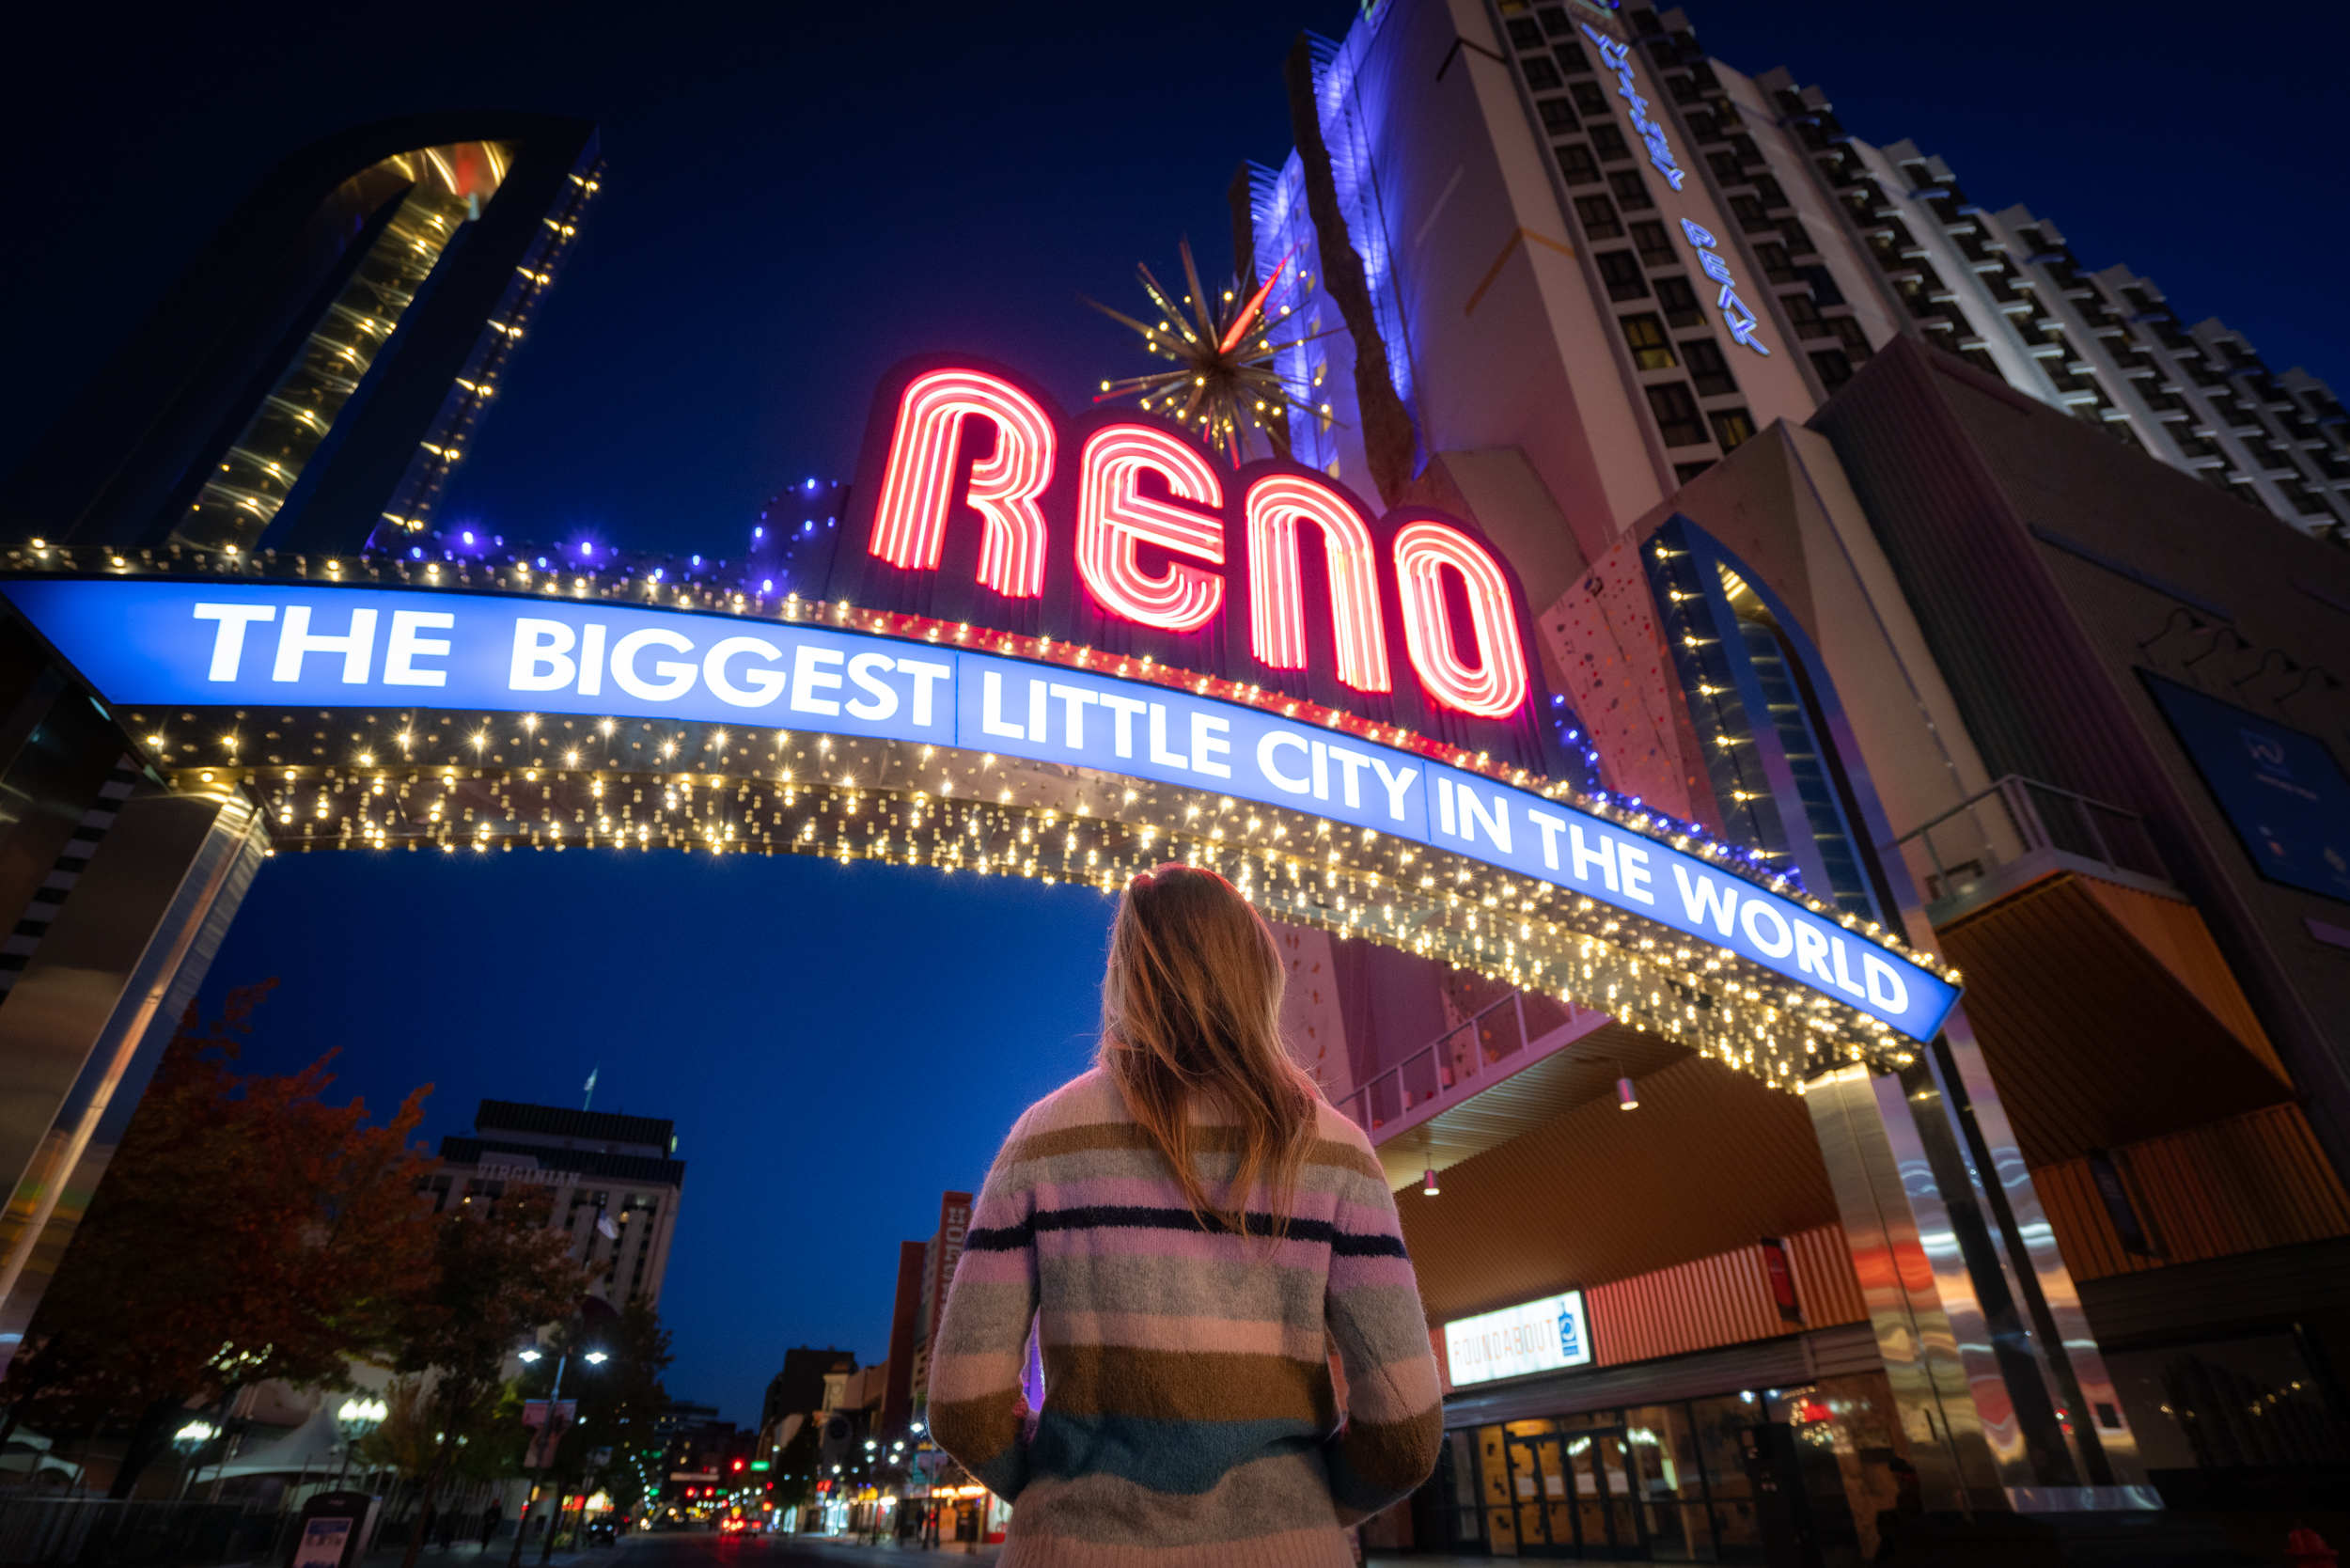 Standing under the famous Reno Arch Sign in downtown Reno.